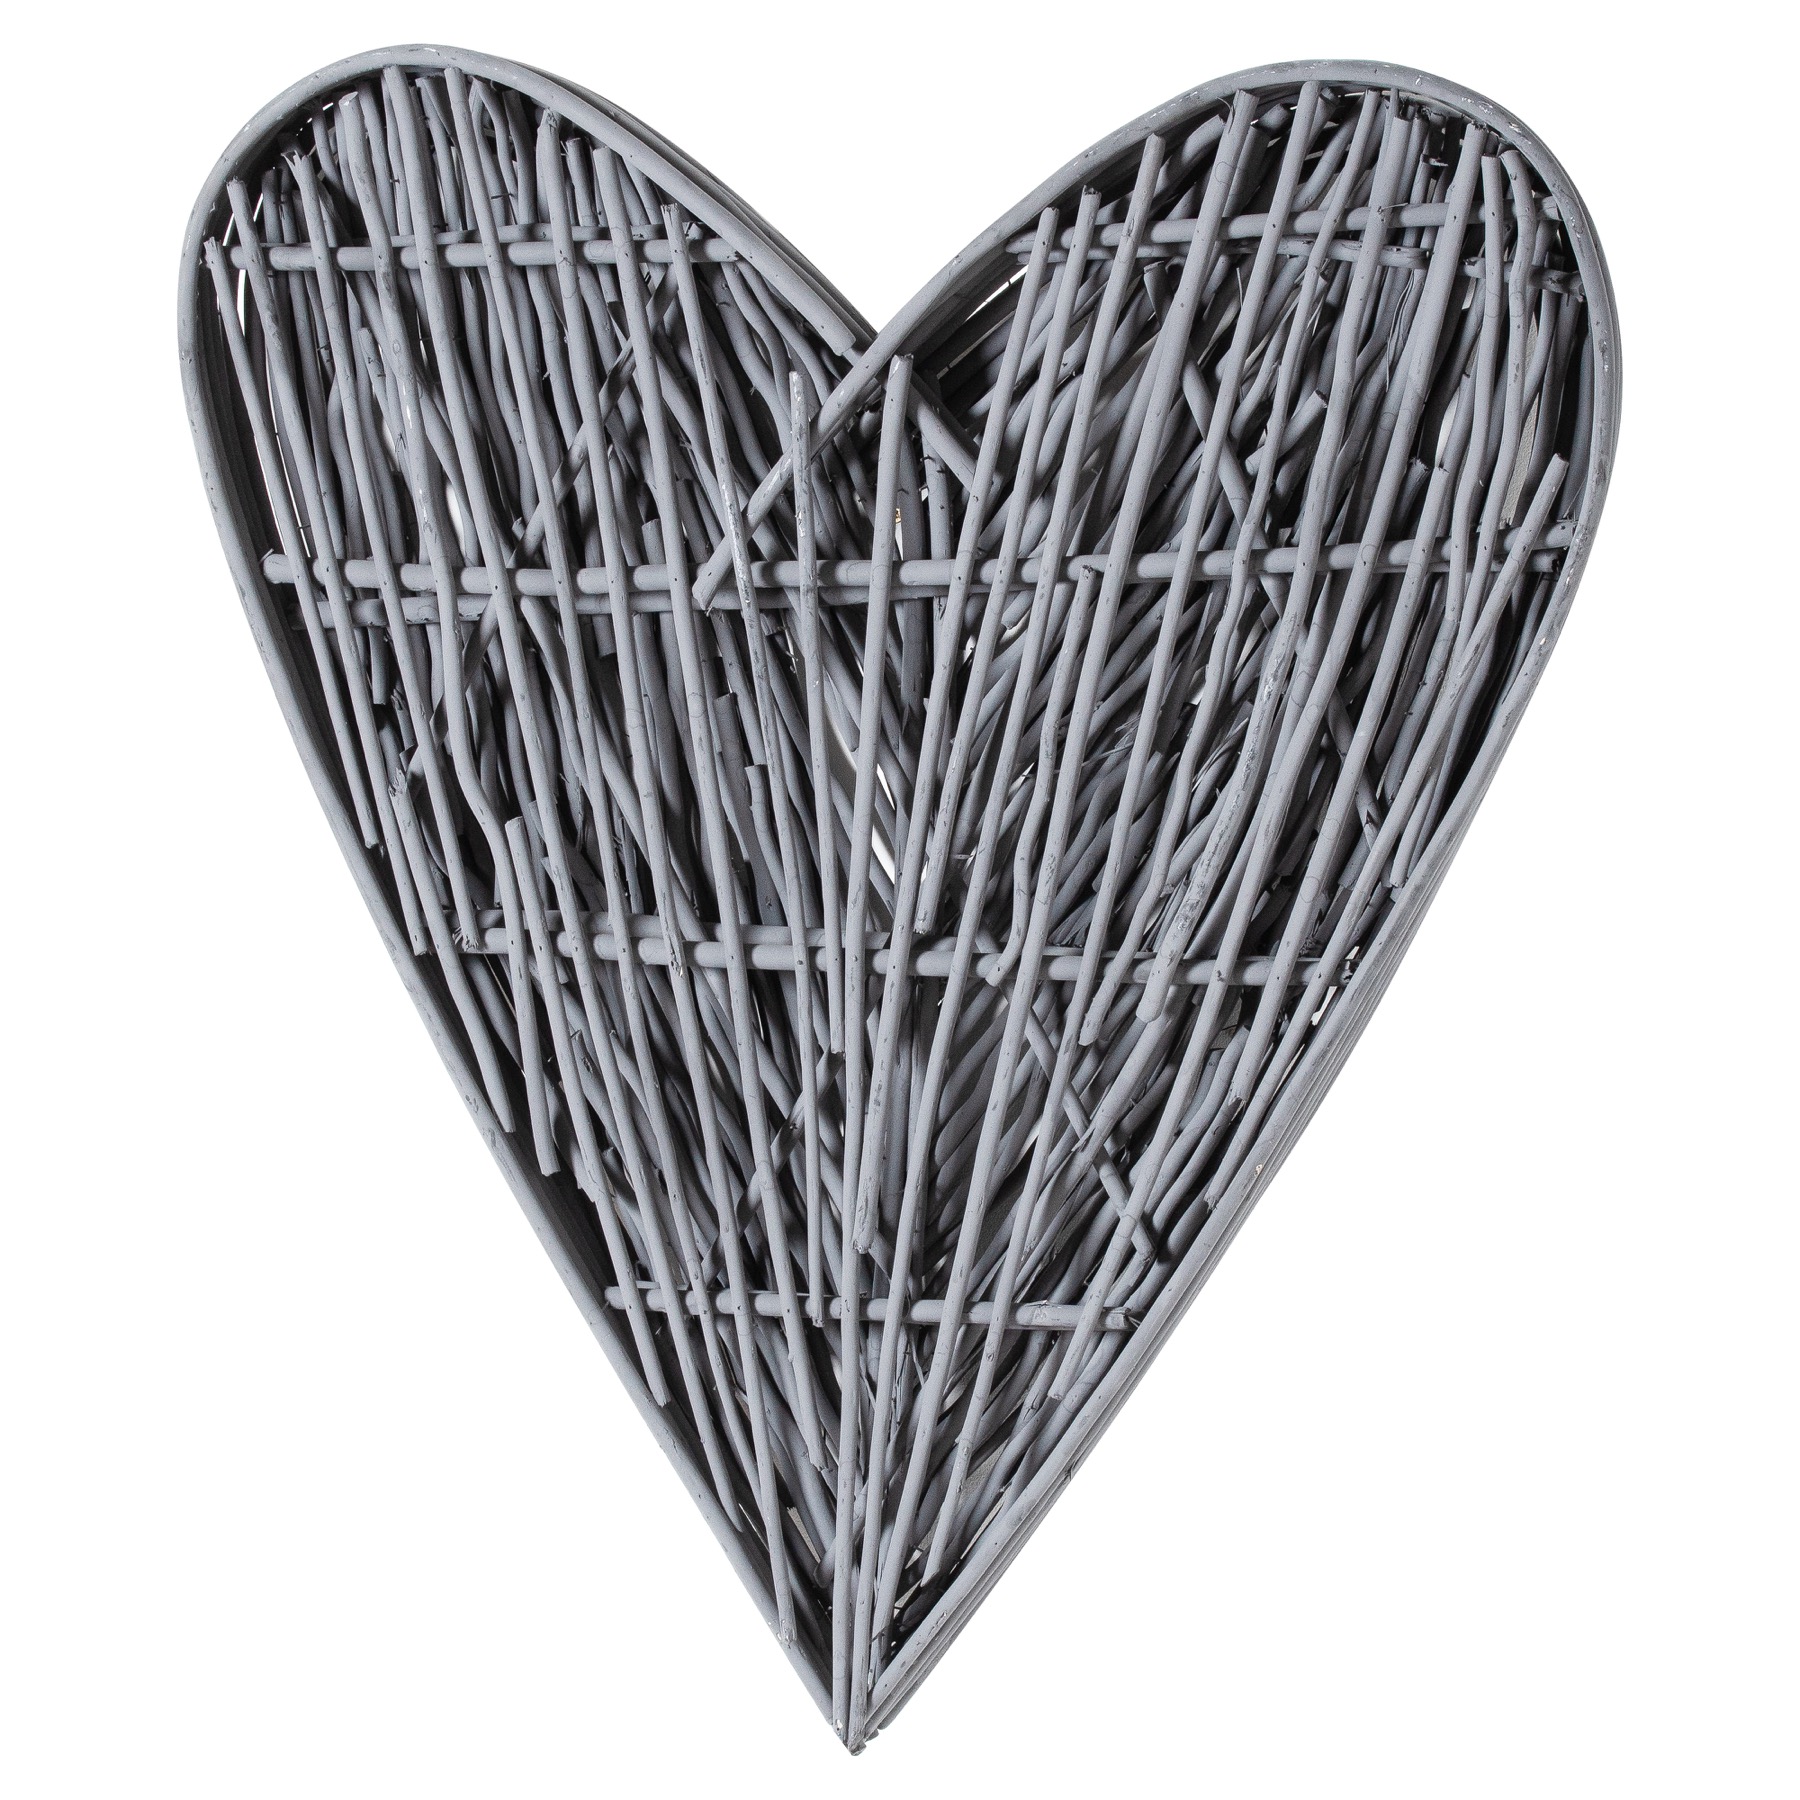 Grey Willow Branch Heart - Image 3